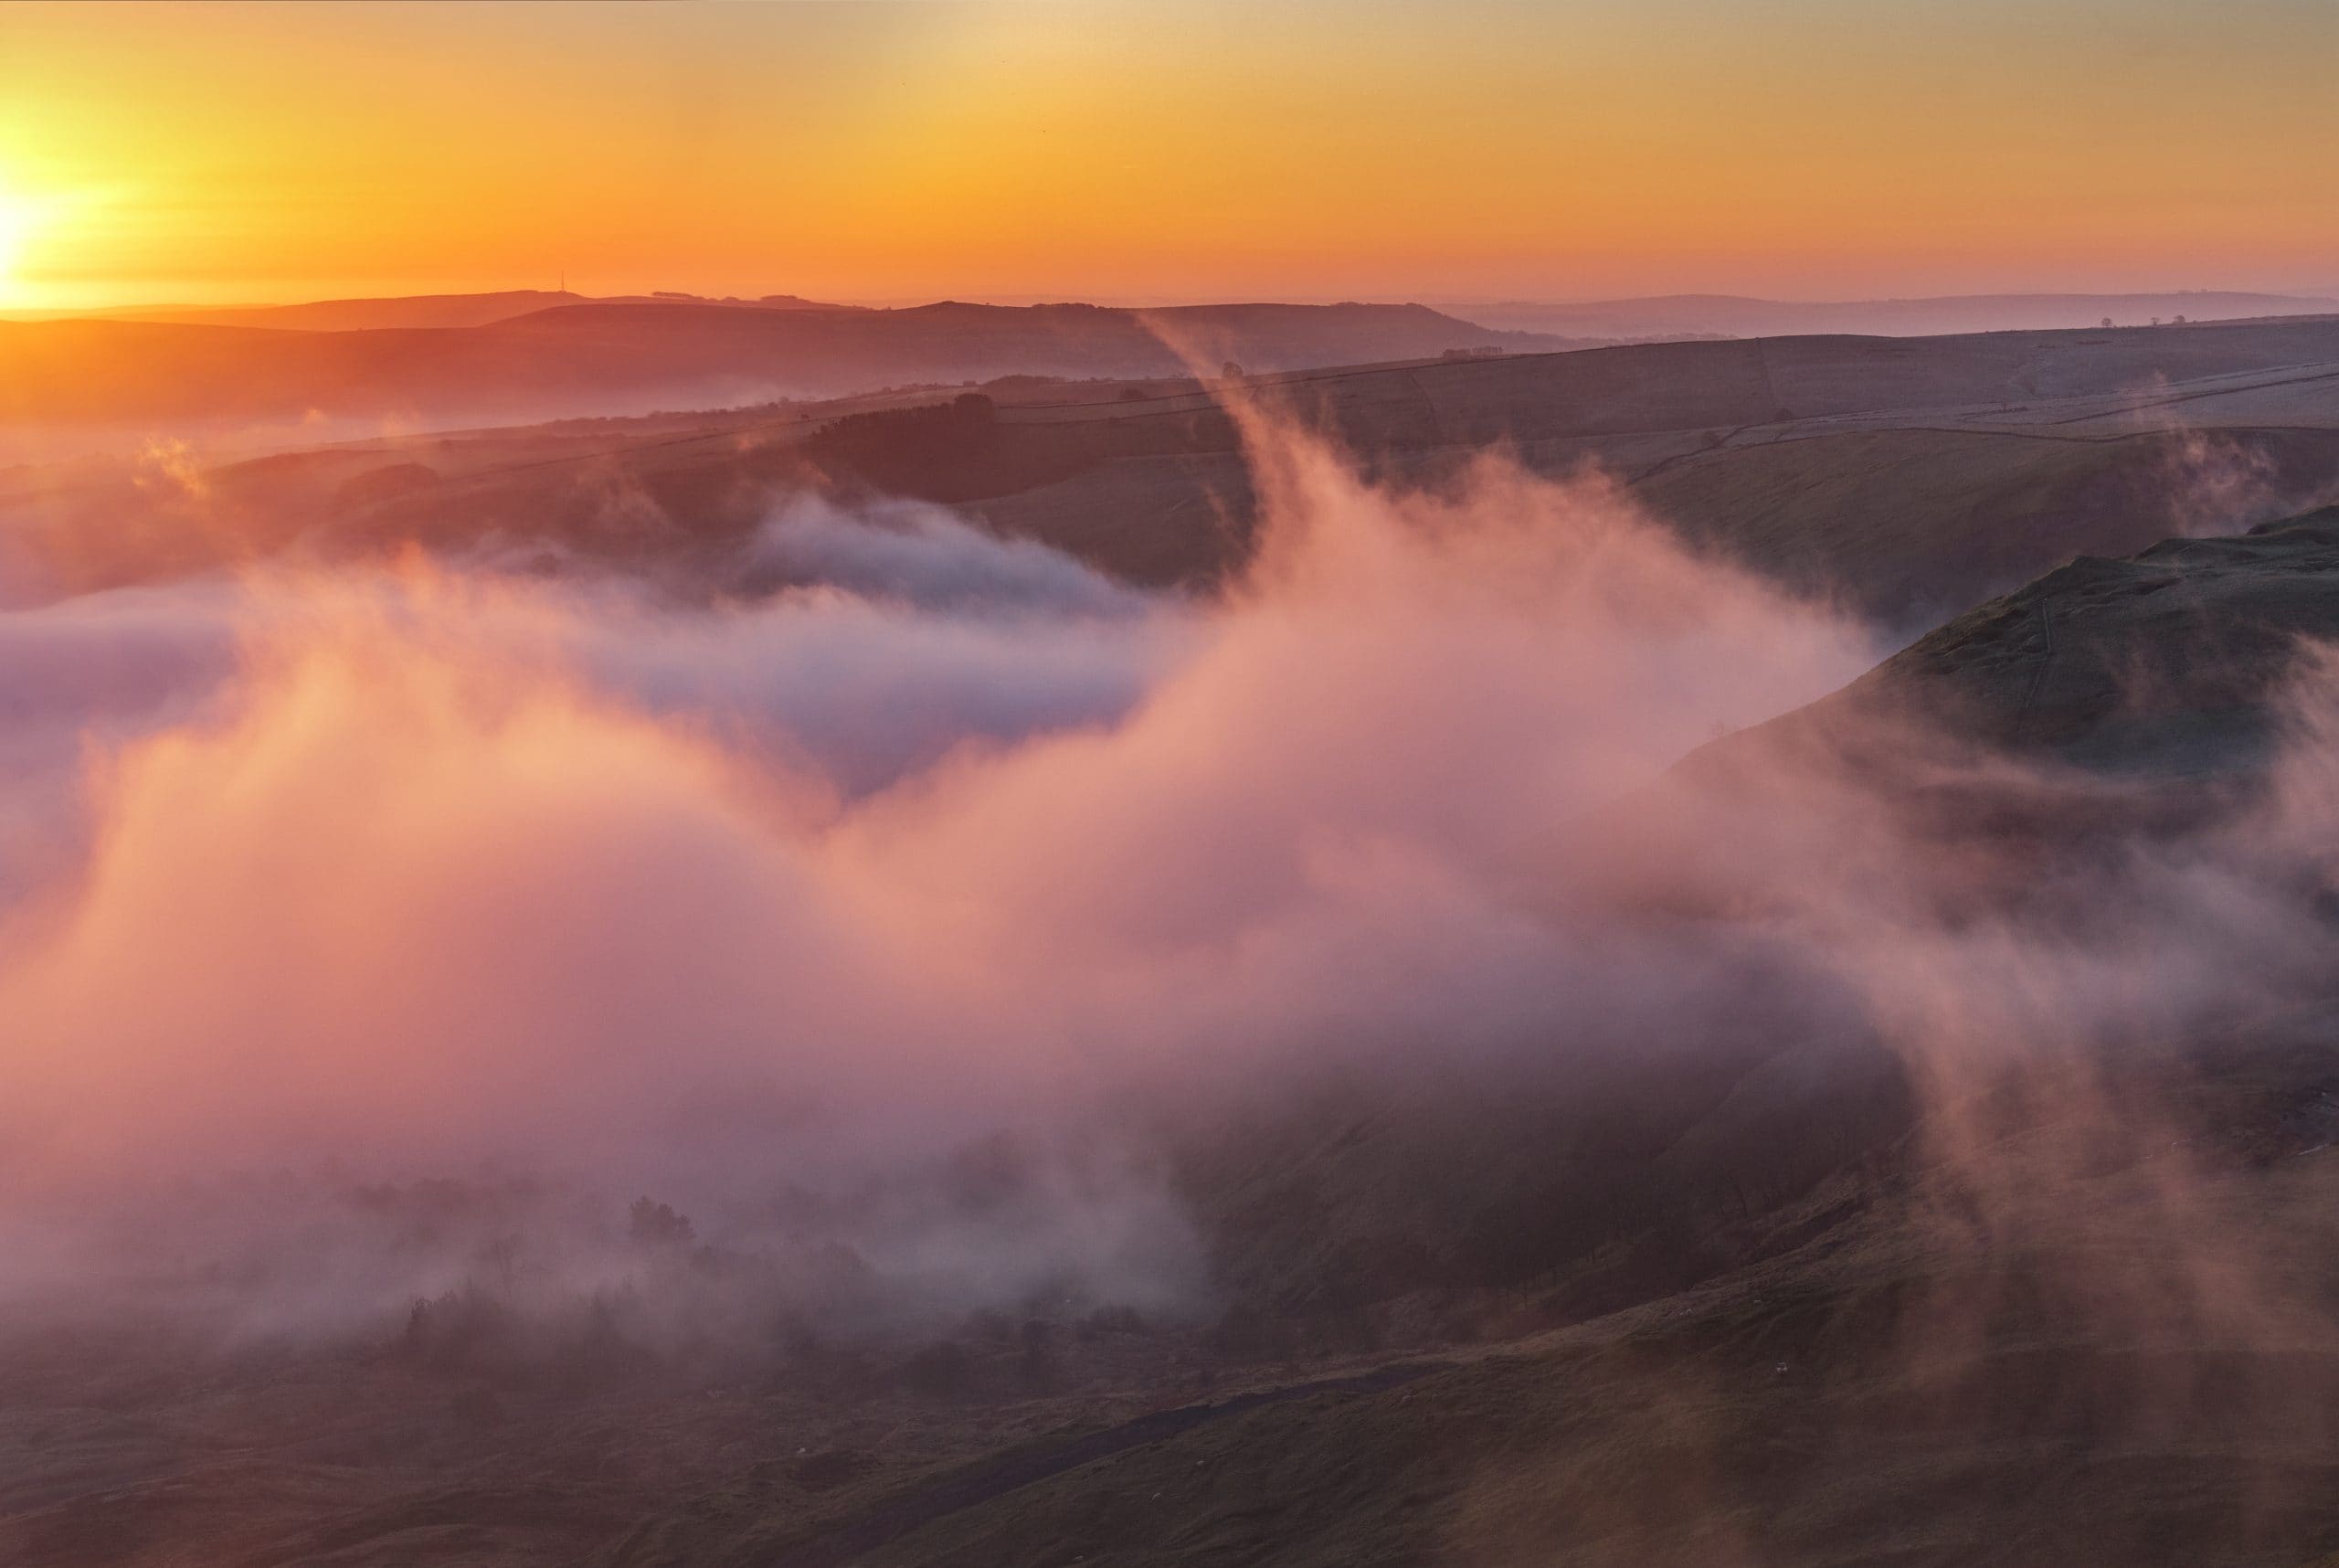 The winter sun rises with intense fog over Hope Valley in Derbyshire